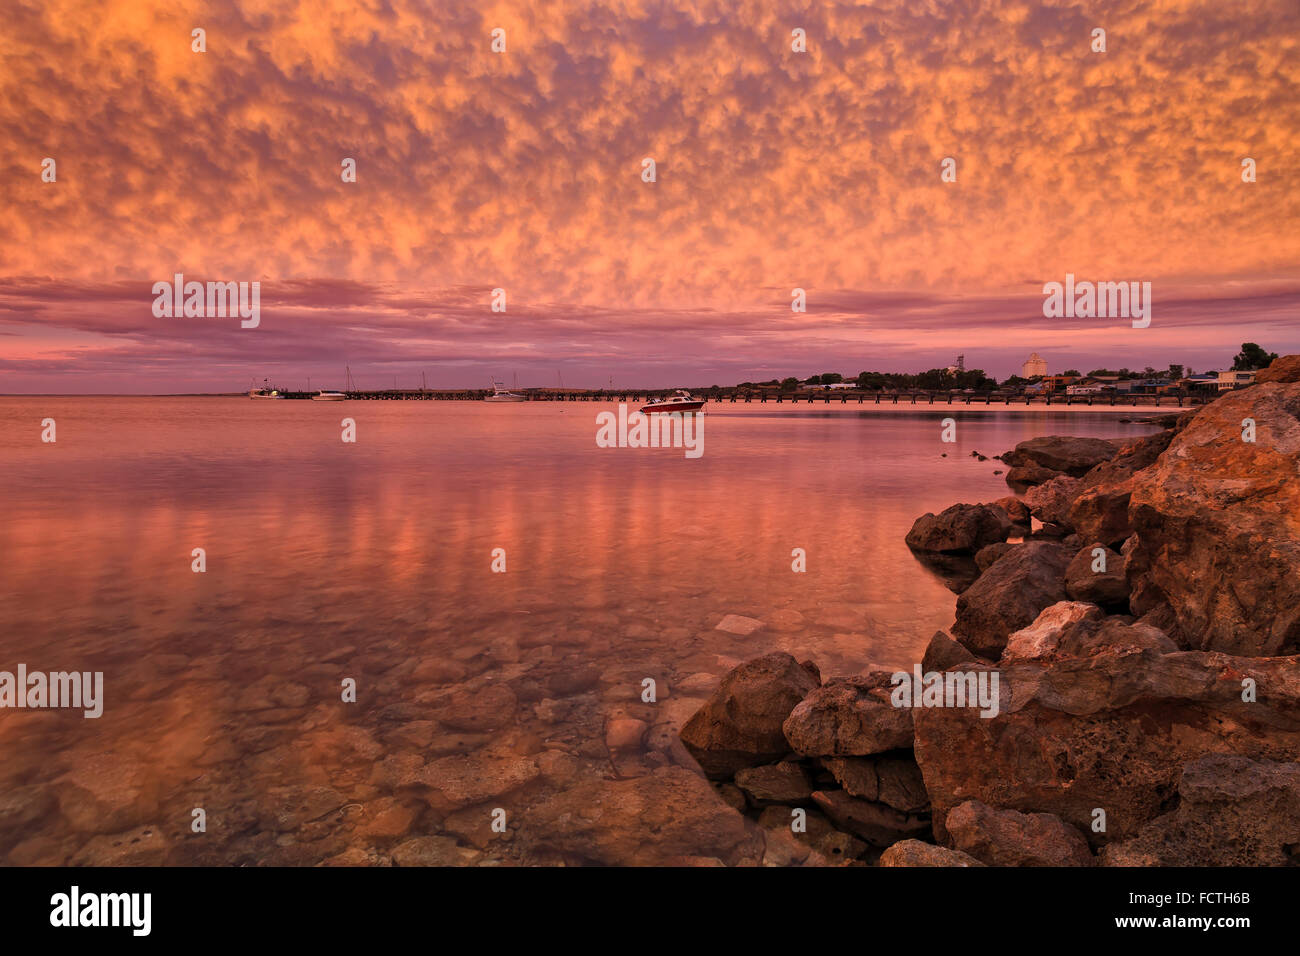 Magestic colourful sunset over still bay of Streaky Bay town in South Australia on Eyre peninsula with transparent water Stock Photo